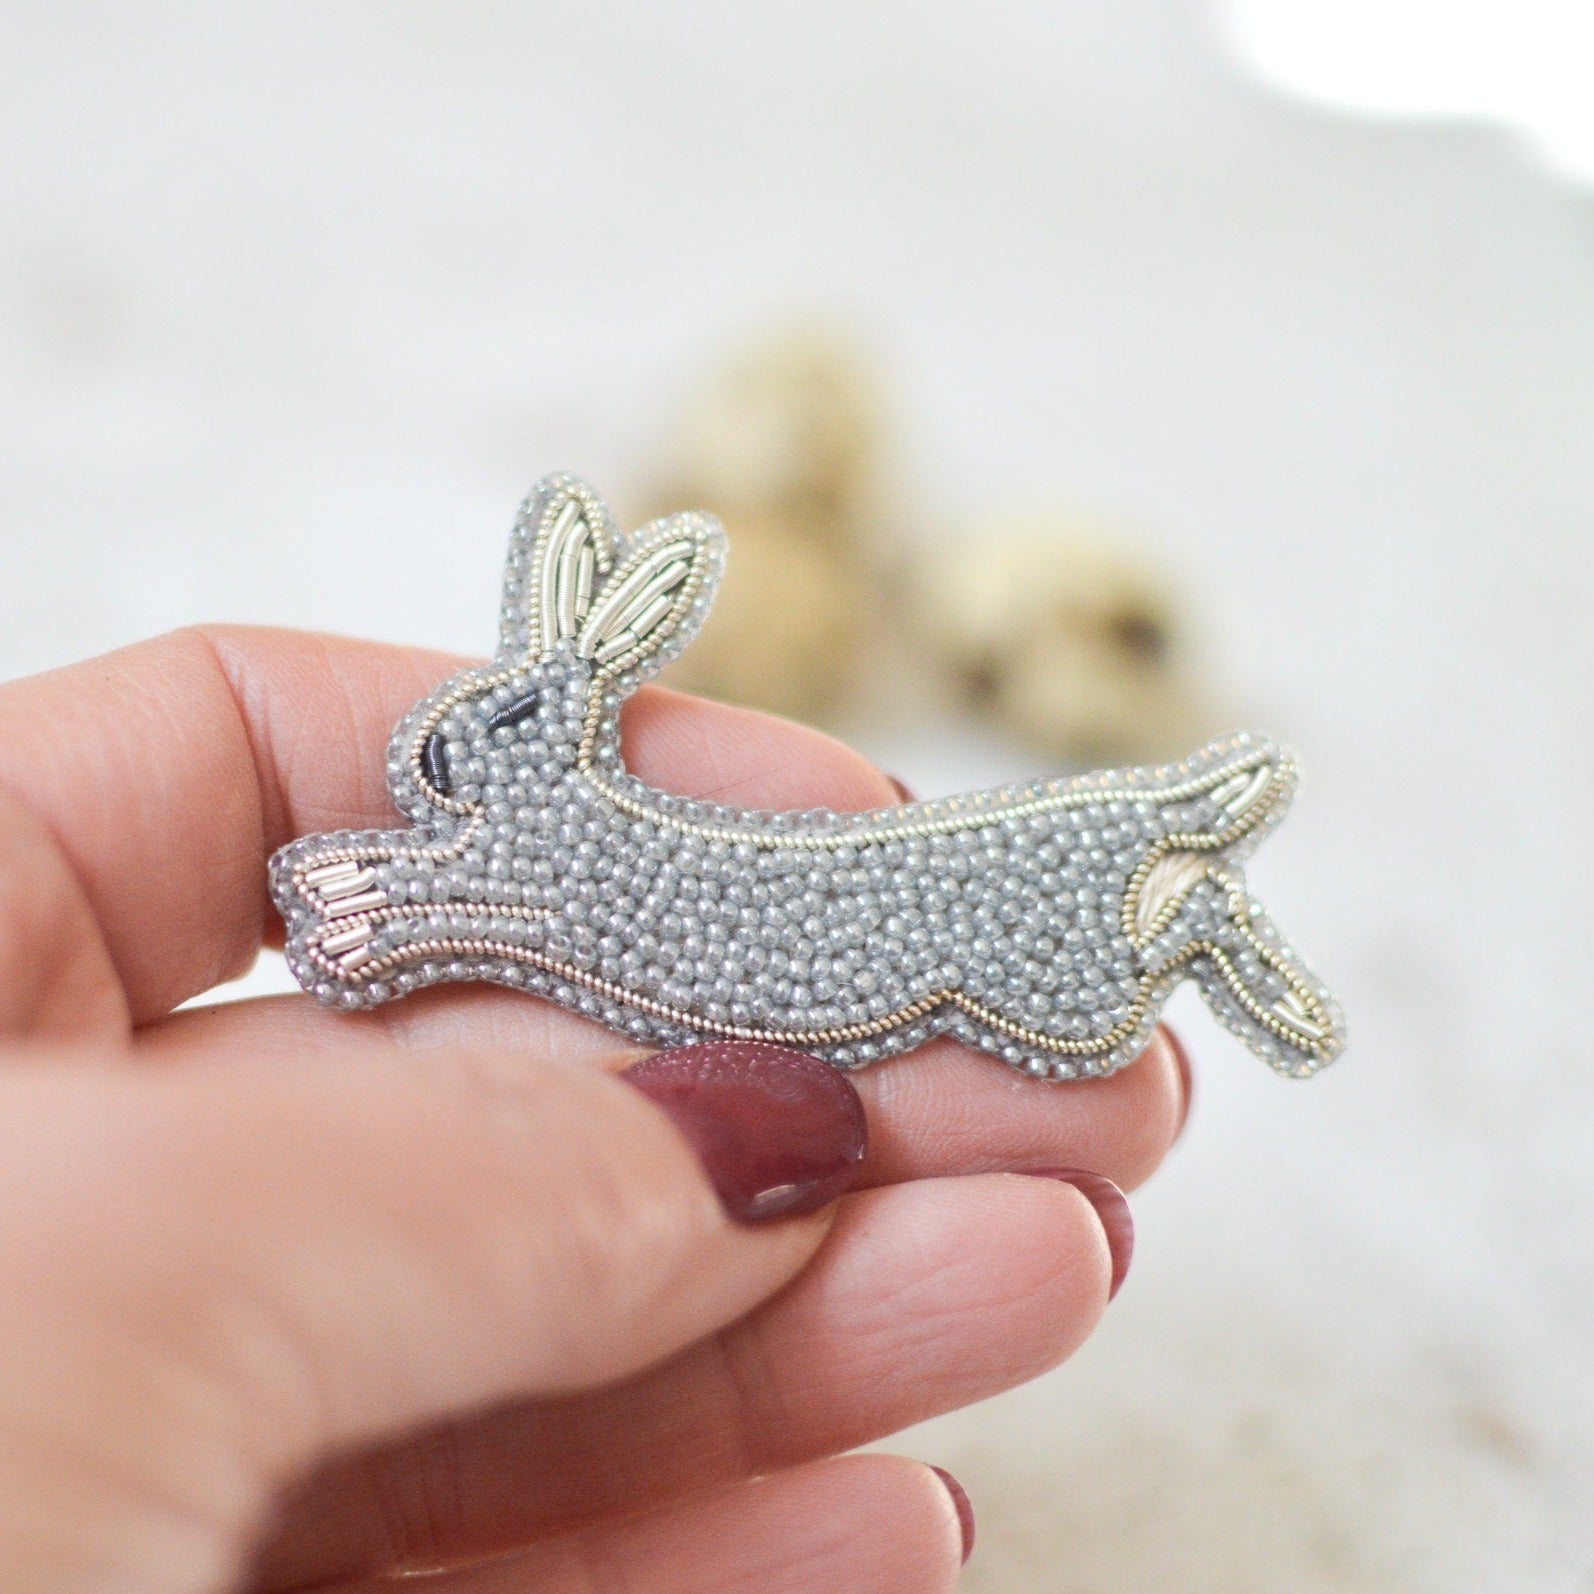 Leaping Hare Bead Embroidery Brooch